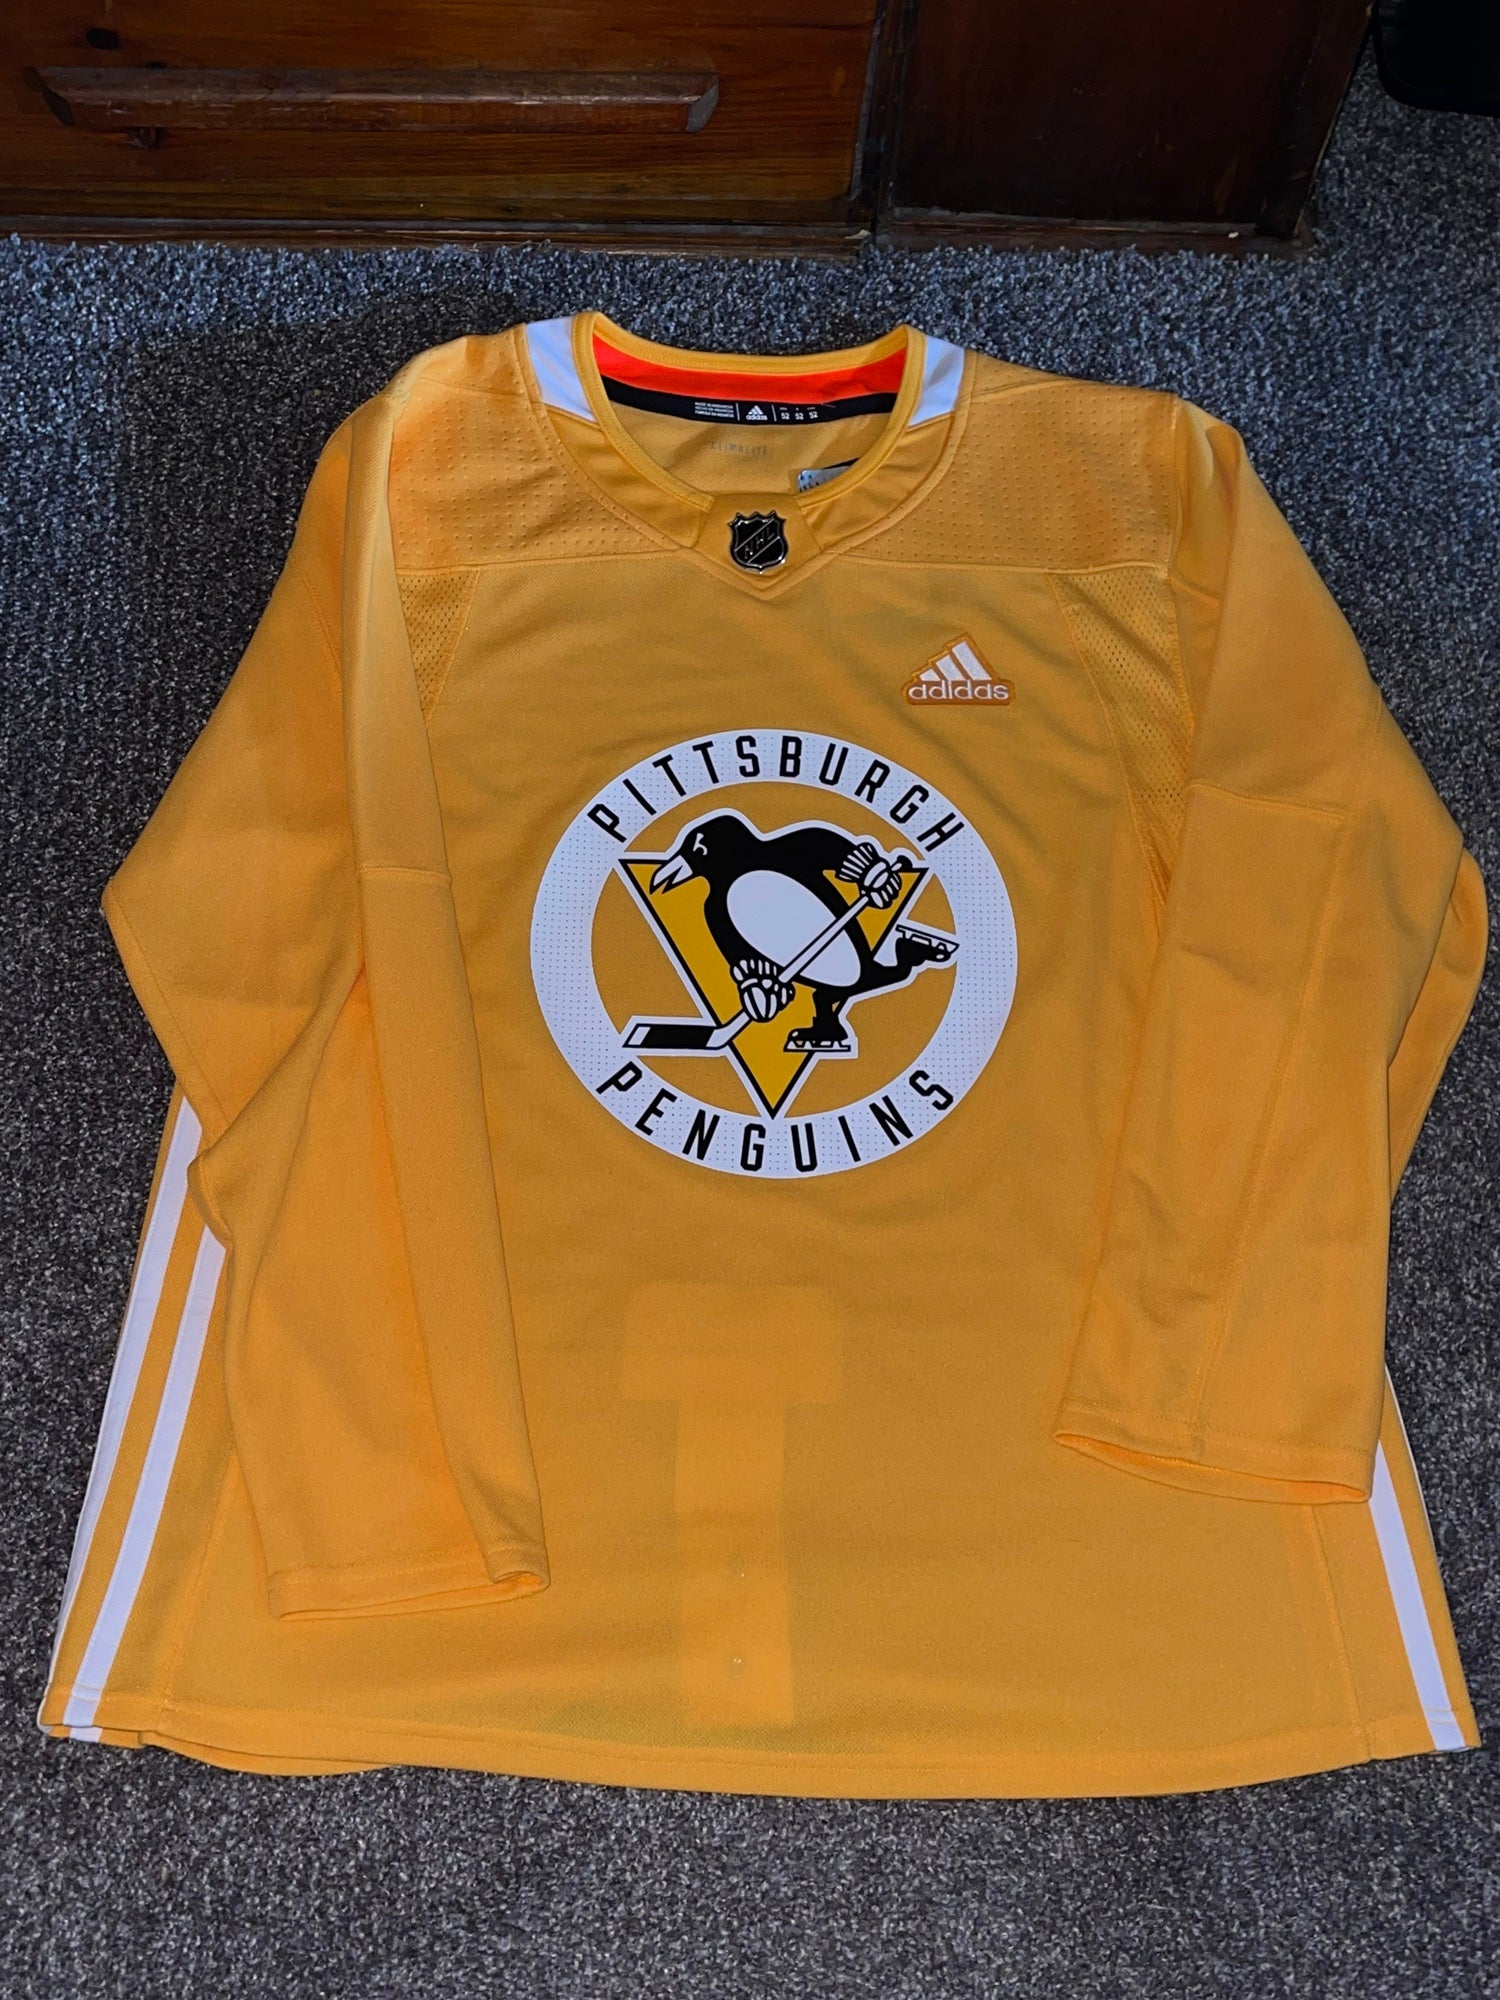 Pittsburgh Penguins 2017-18 Adidas practice jerseys leaked in